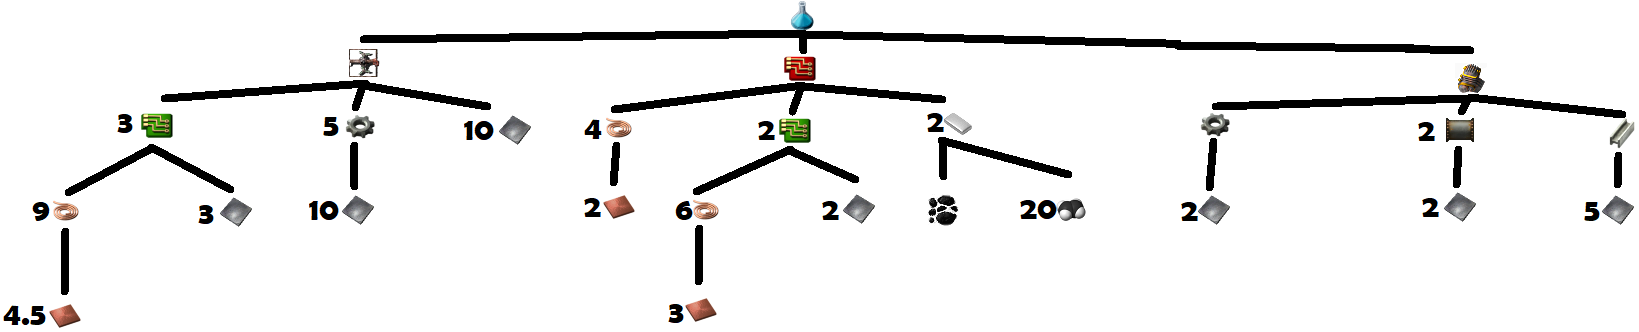 Science Pack 3 Crafting Tree.png